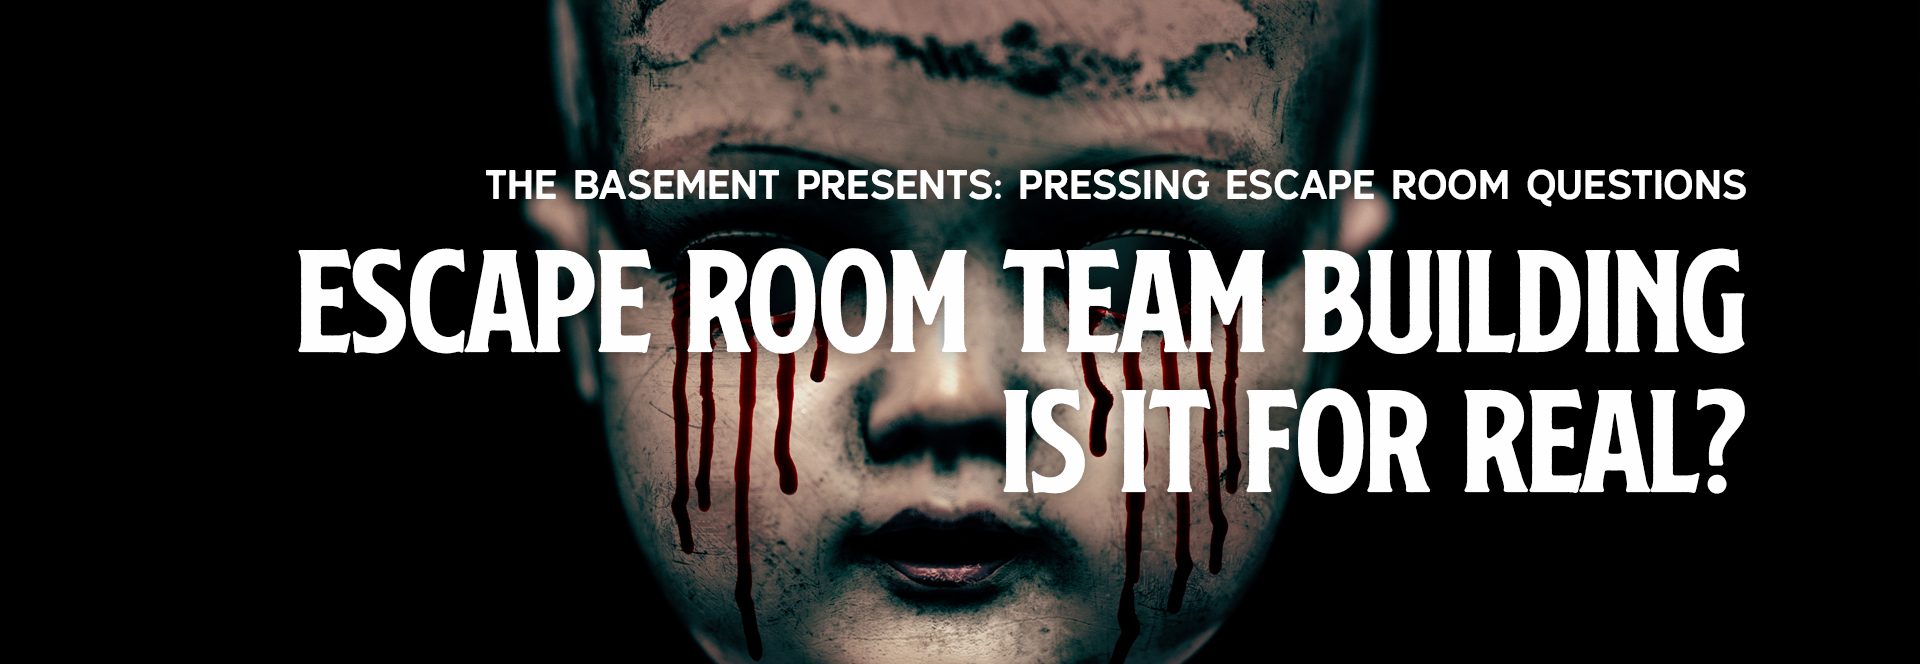 Escape Room Team Building - Is It For Real?